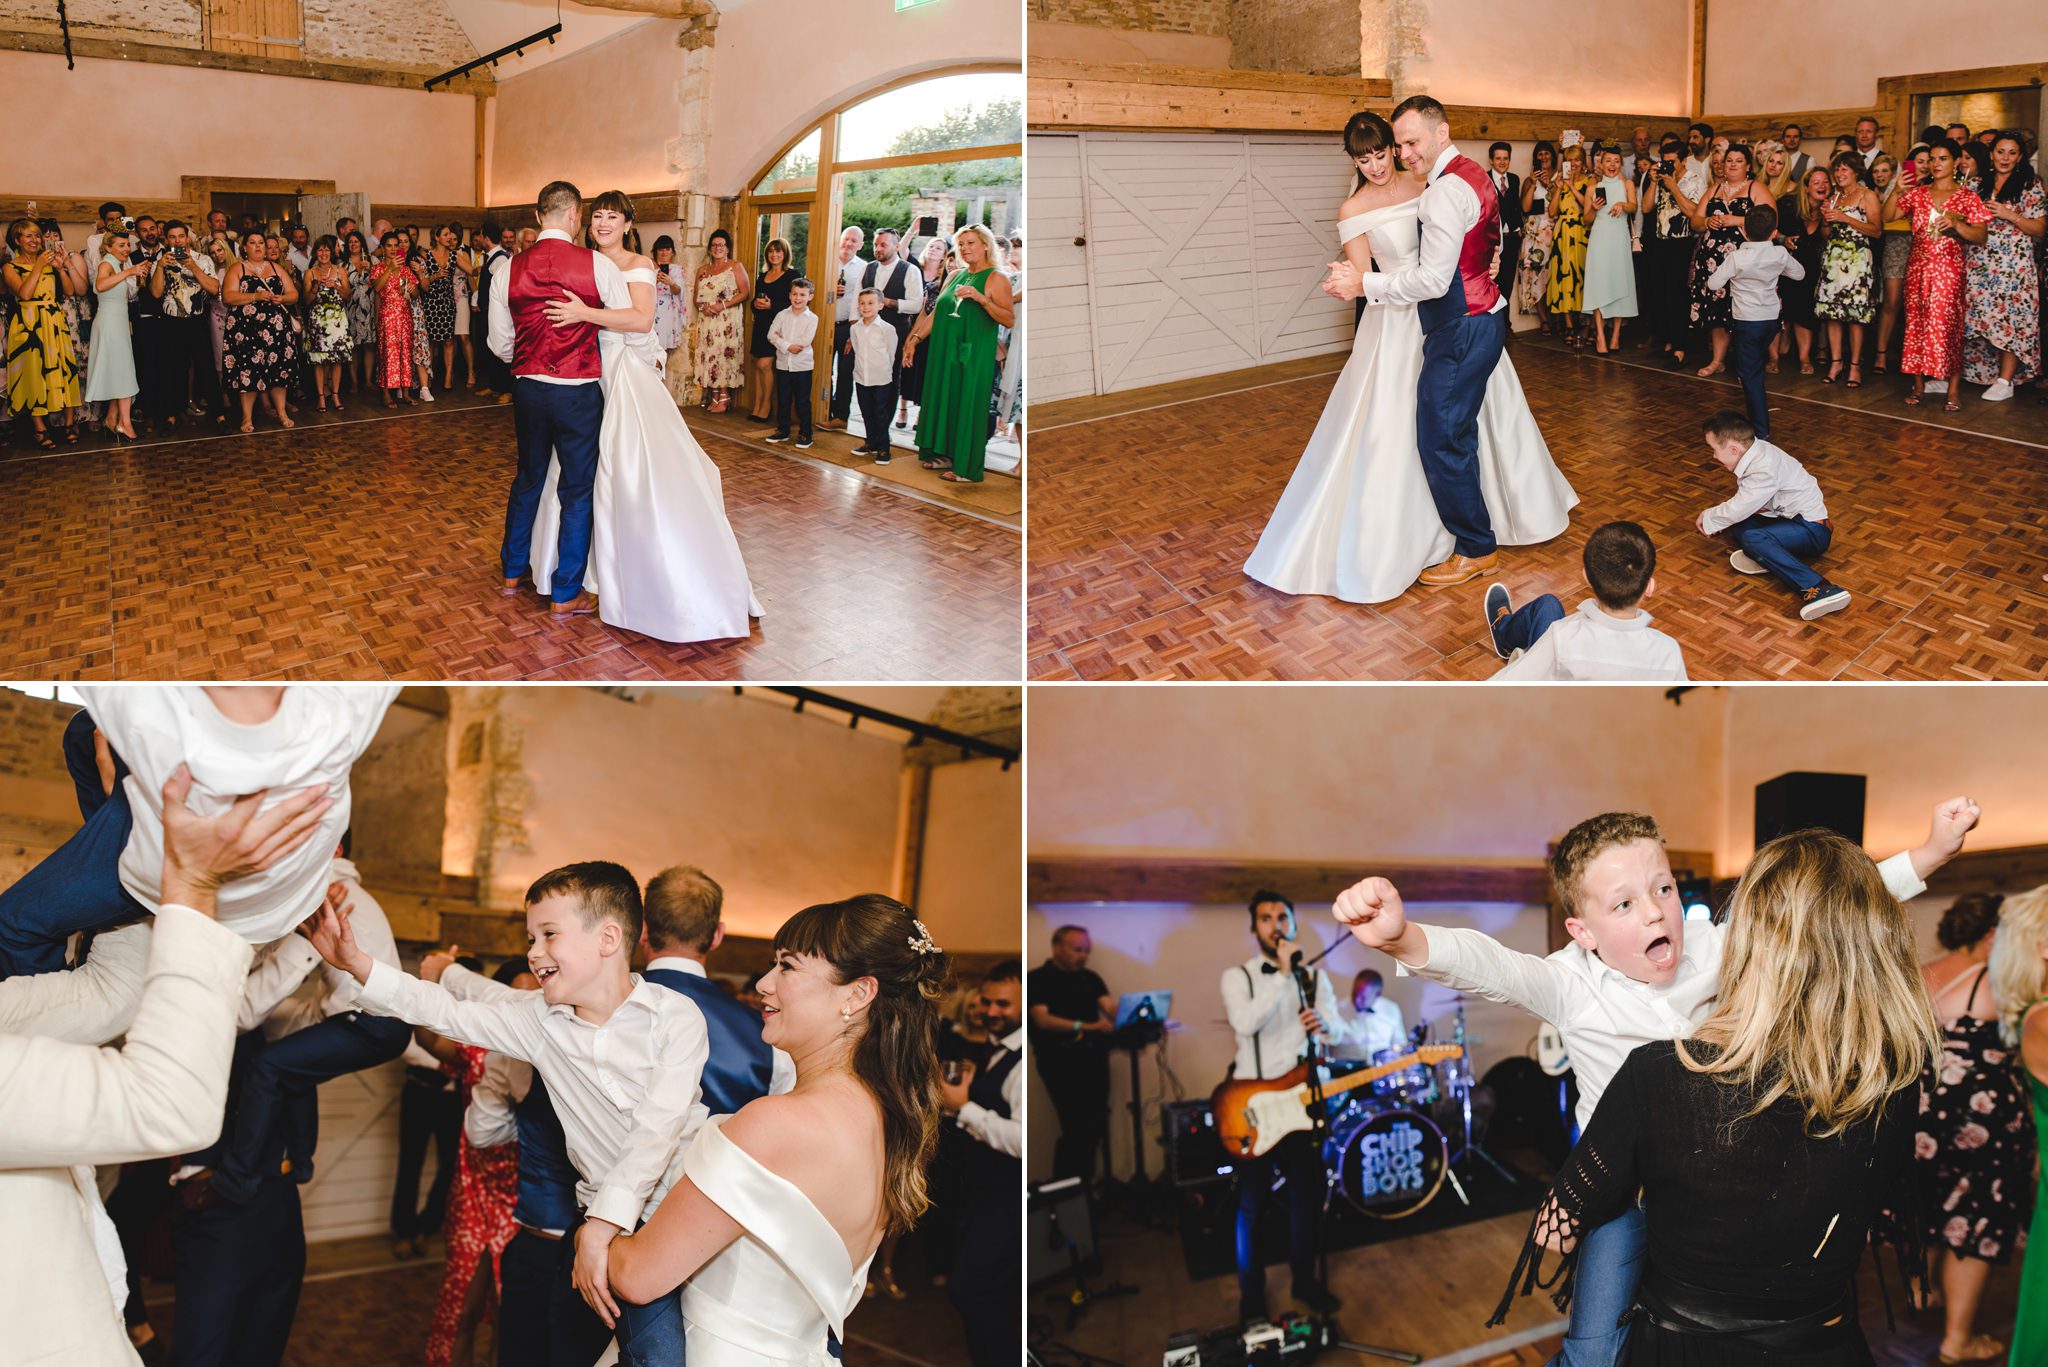 Wedding guests dancing at Oxleaze Barn